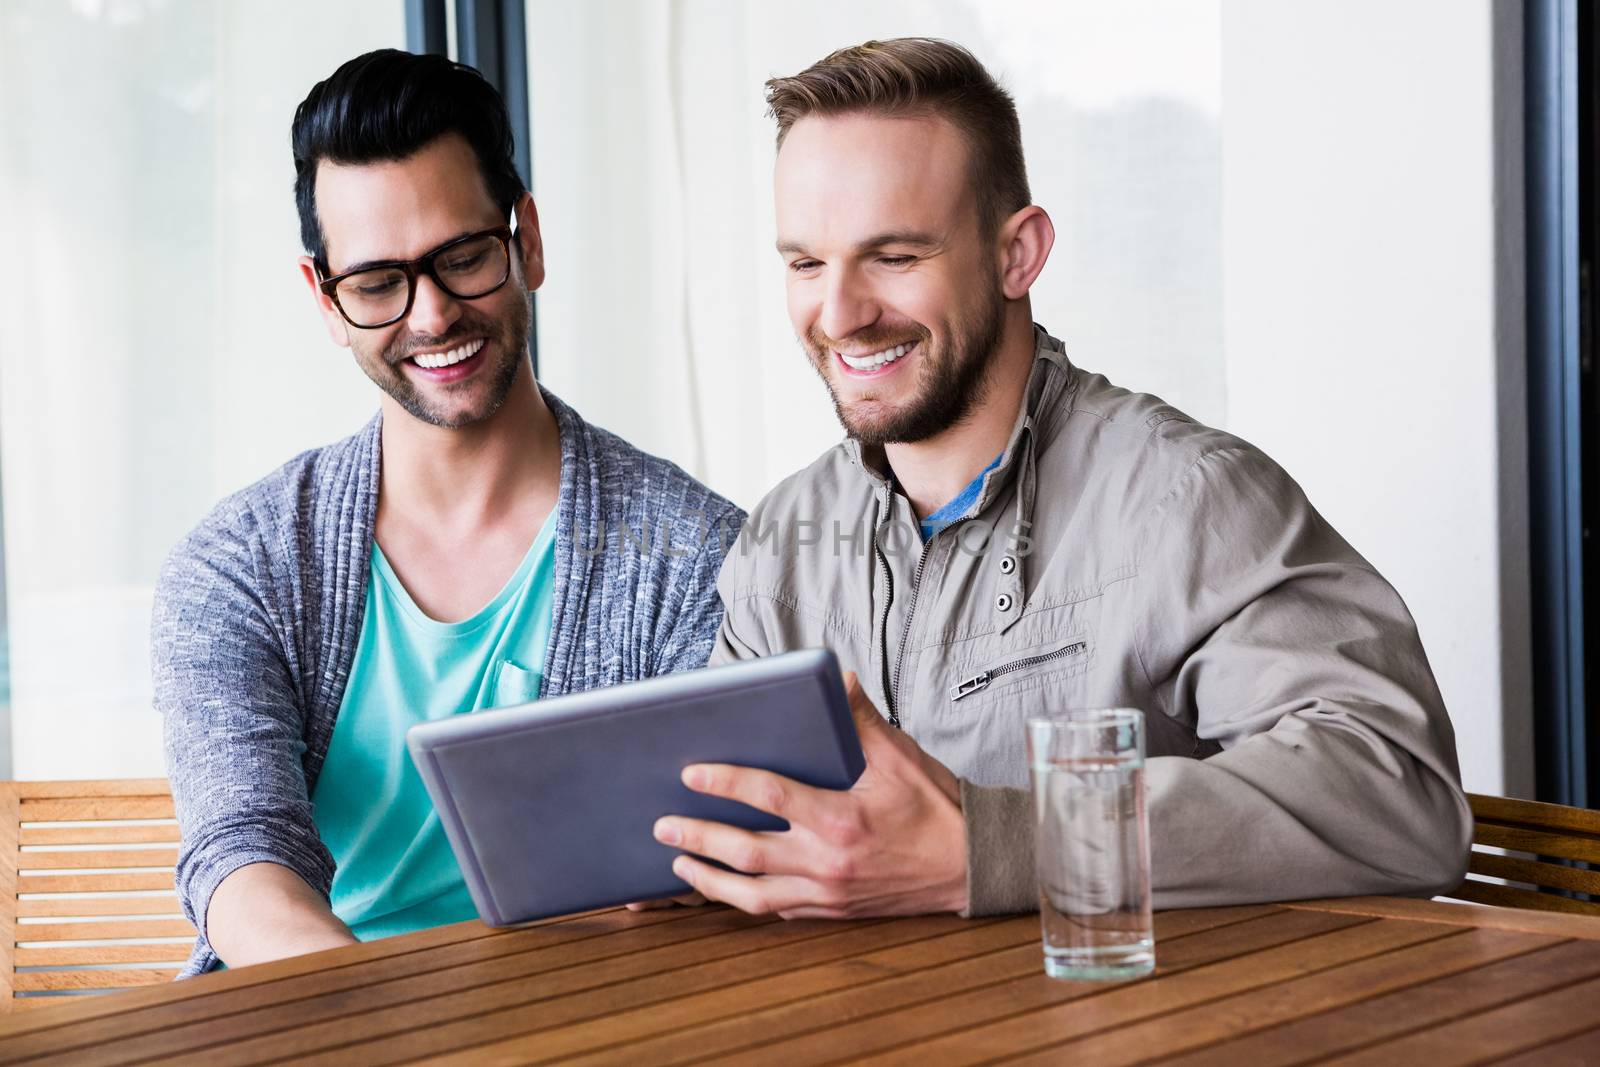 Smiling gay couple using tablet outdoors 